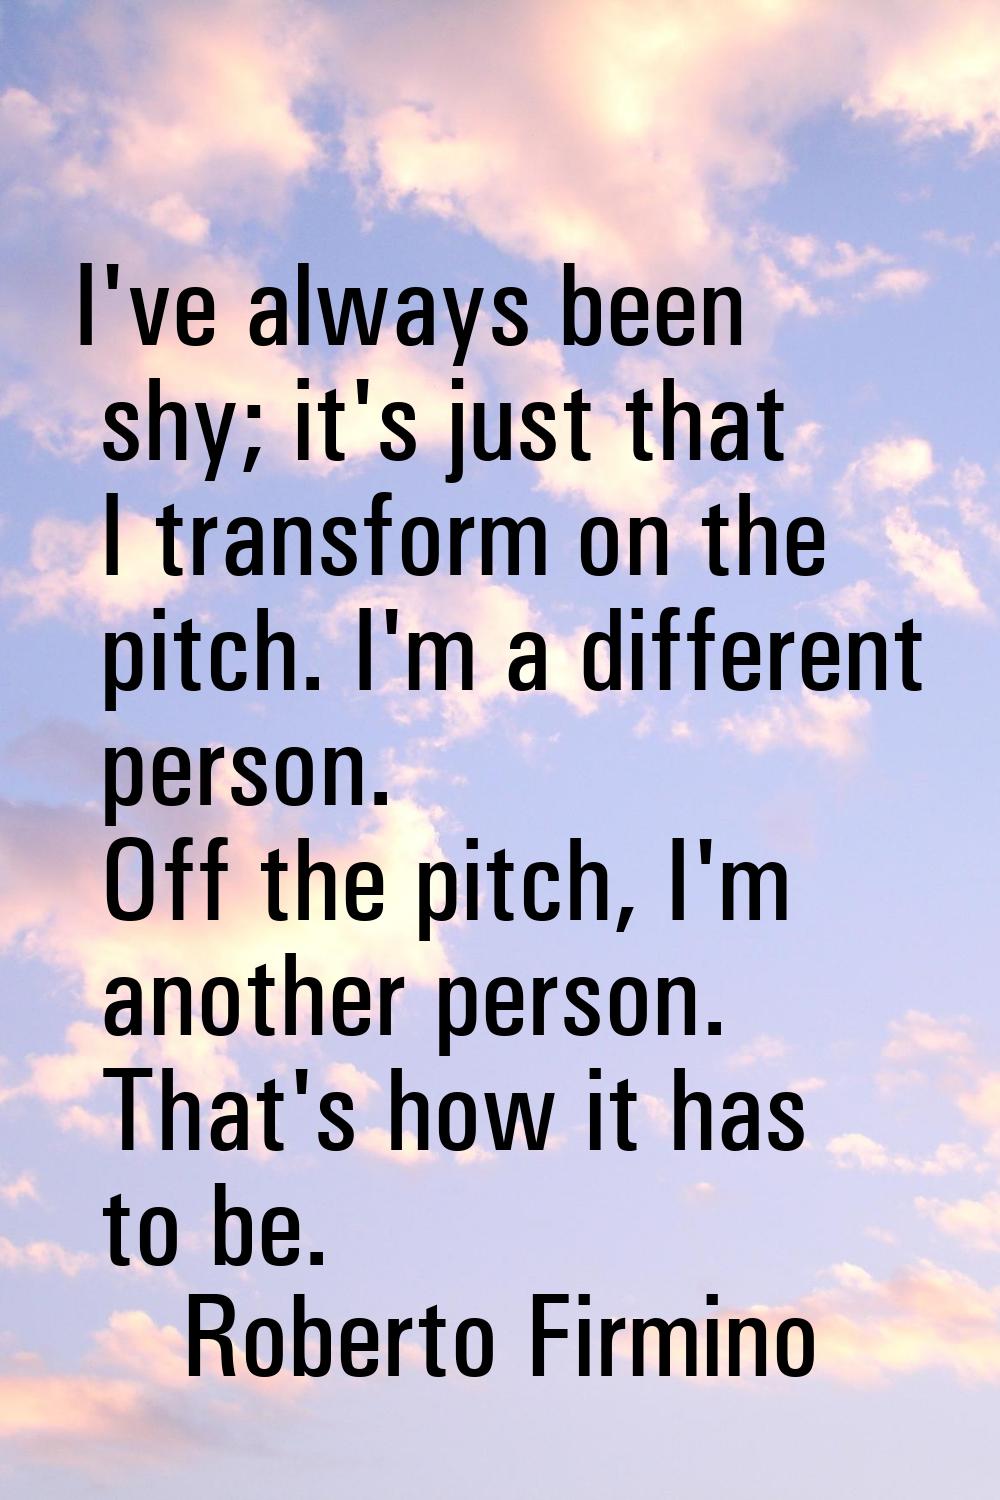 I've always been shy; it's just that I transform on the pitch. I'm a different person. Off the pitc